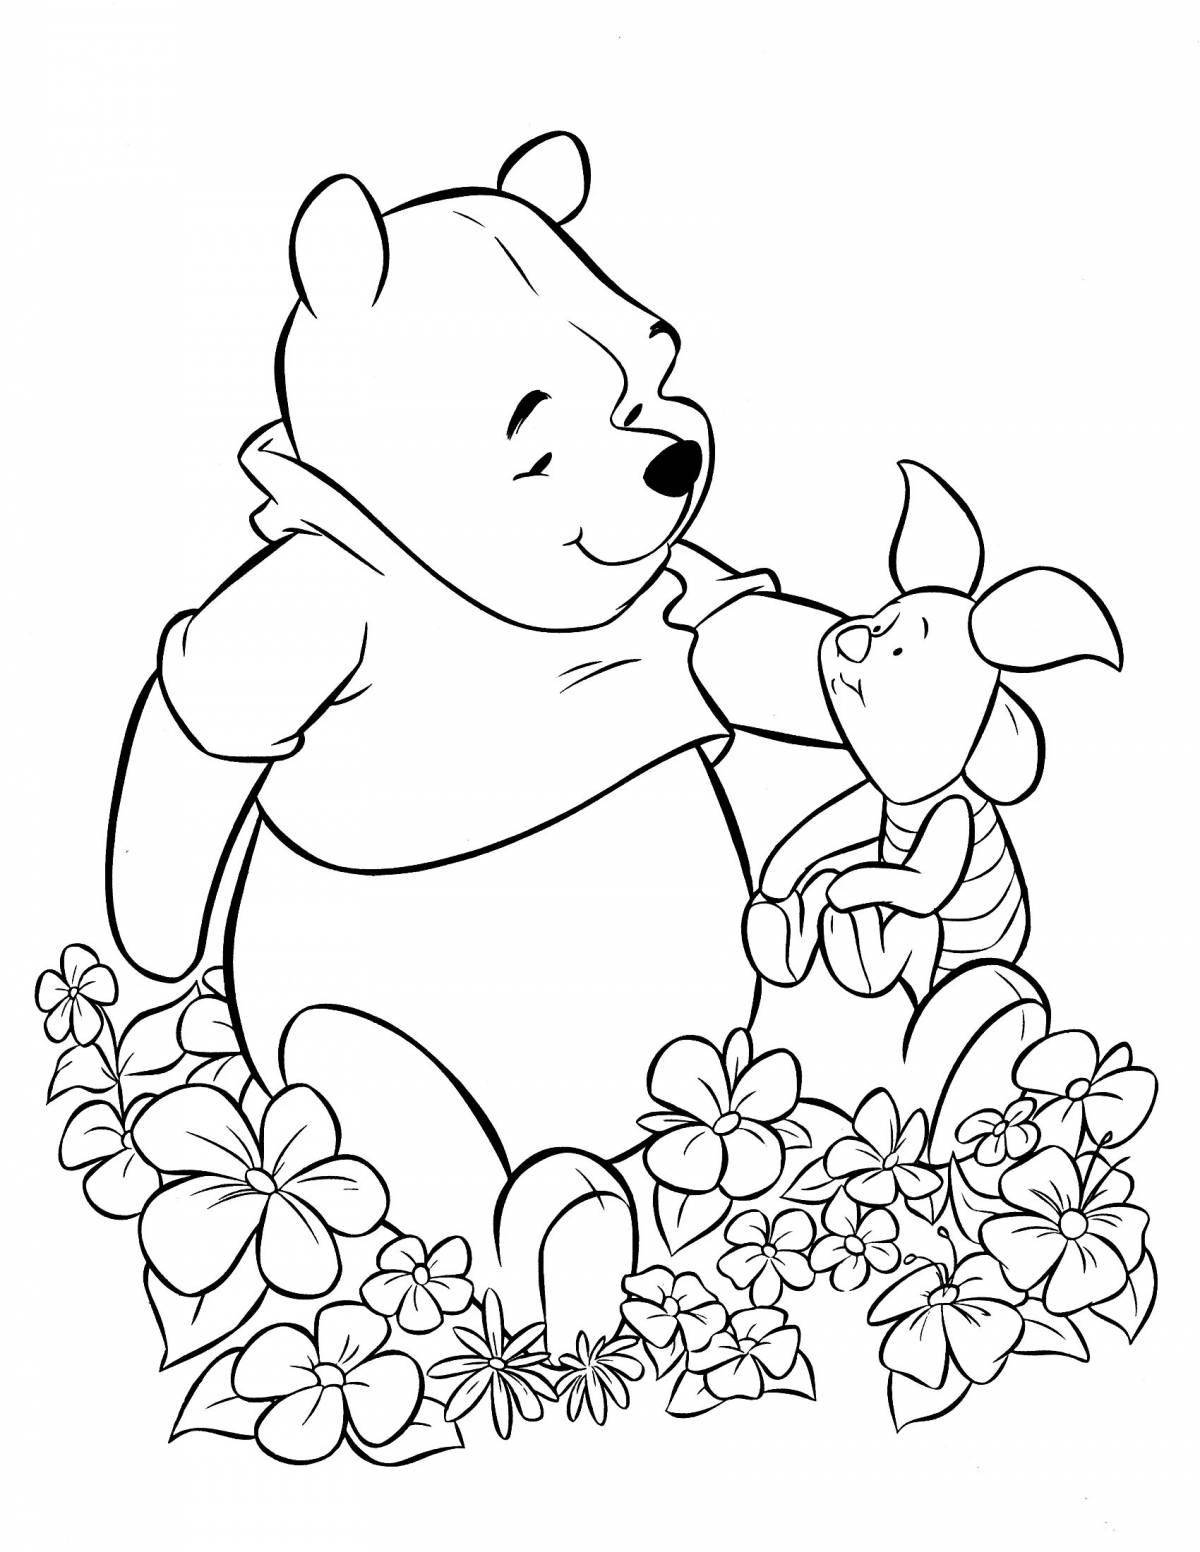 Glowing Winnie the Pooh coloring page